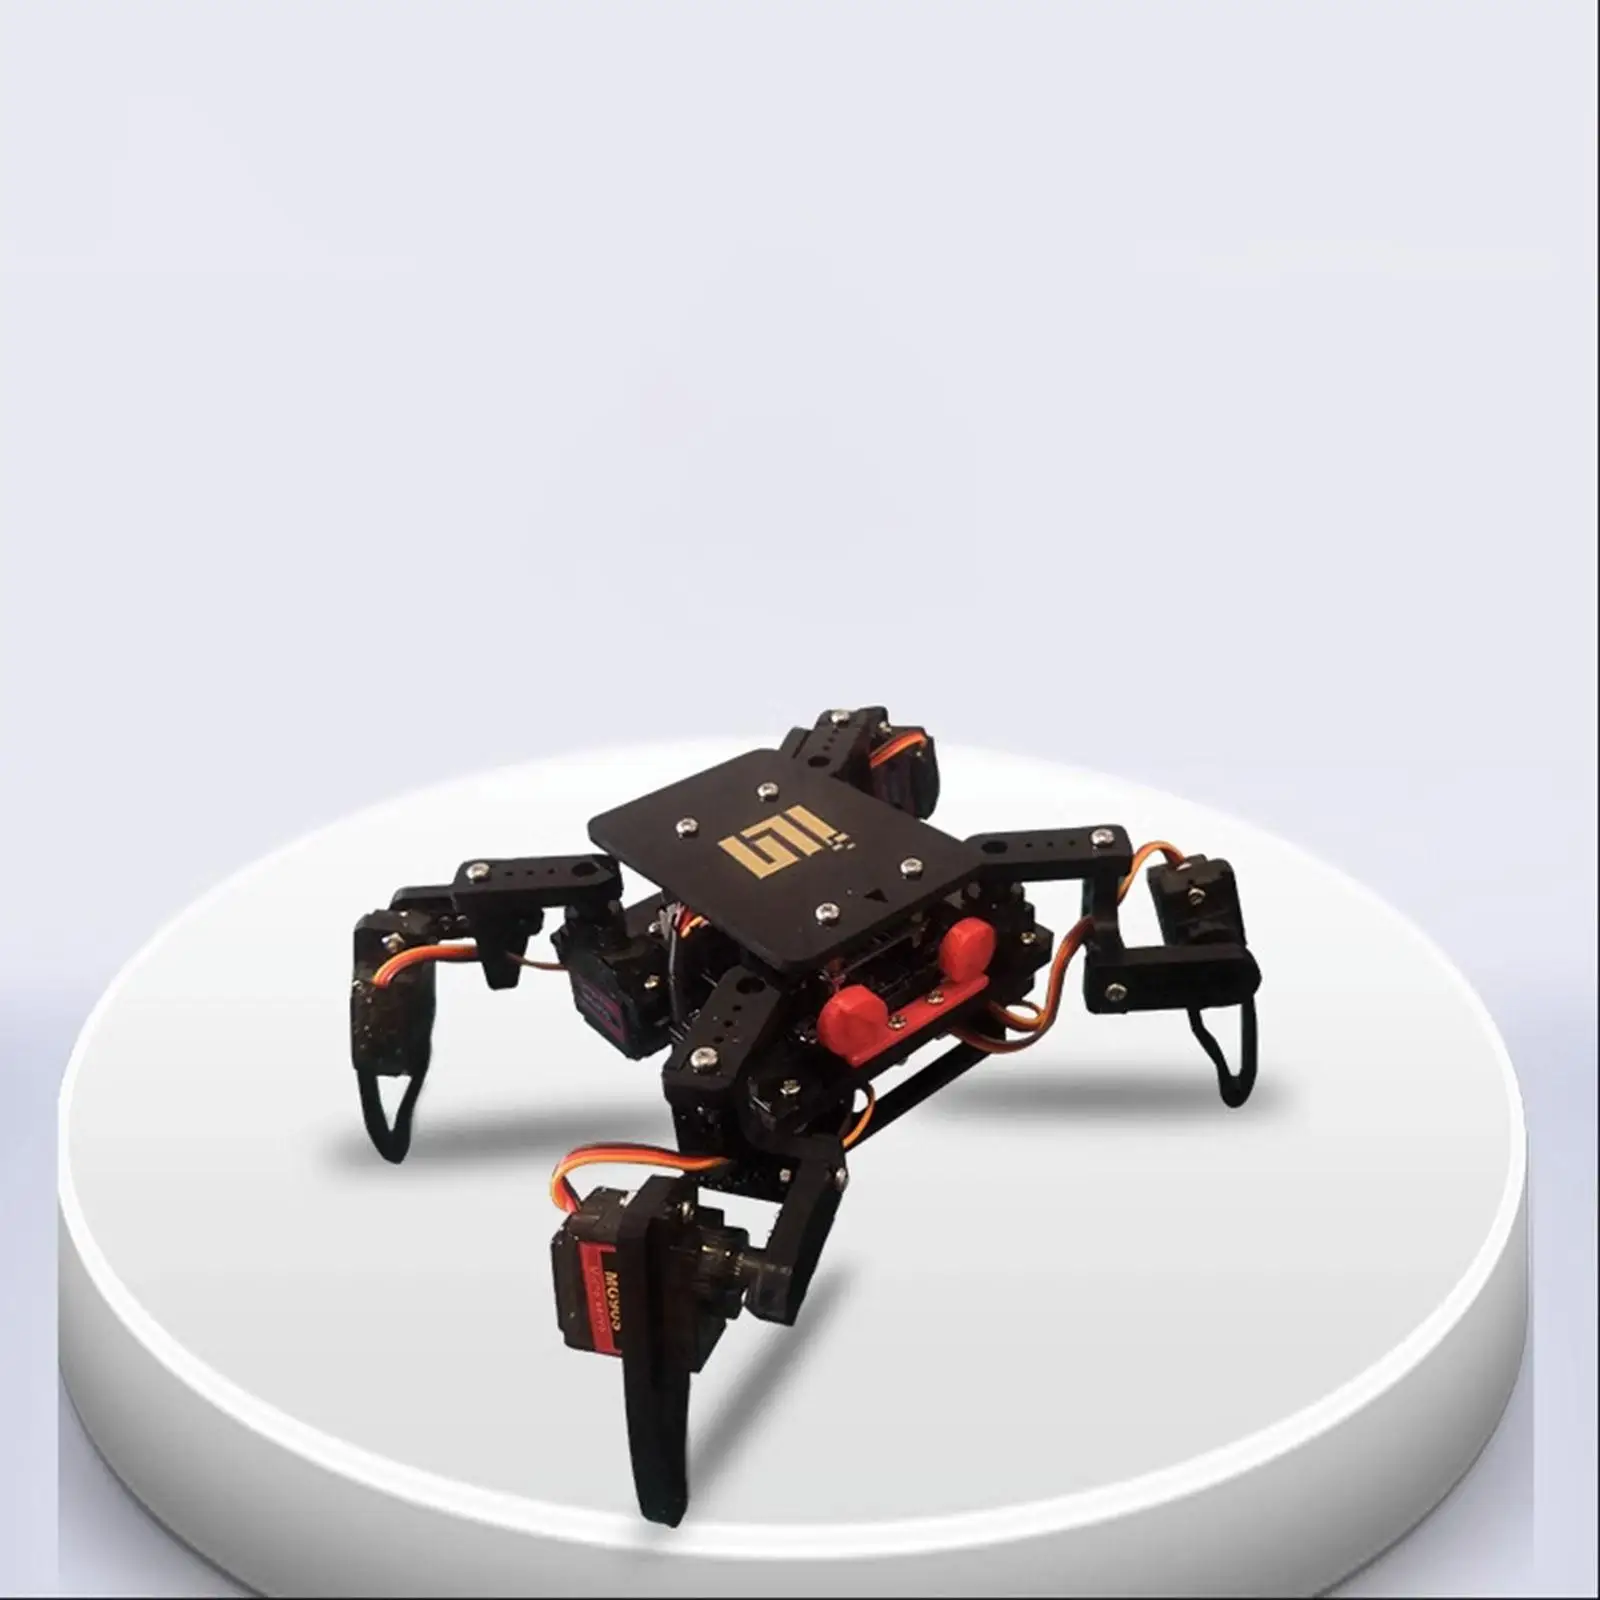 DIY Quadruped Robot Kits Lightweight Educational Scientific Building Kits for Electronic Competition Teaching Aids Teens Adults